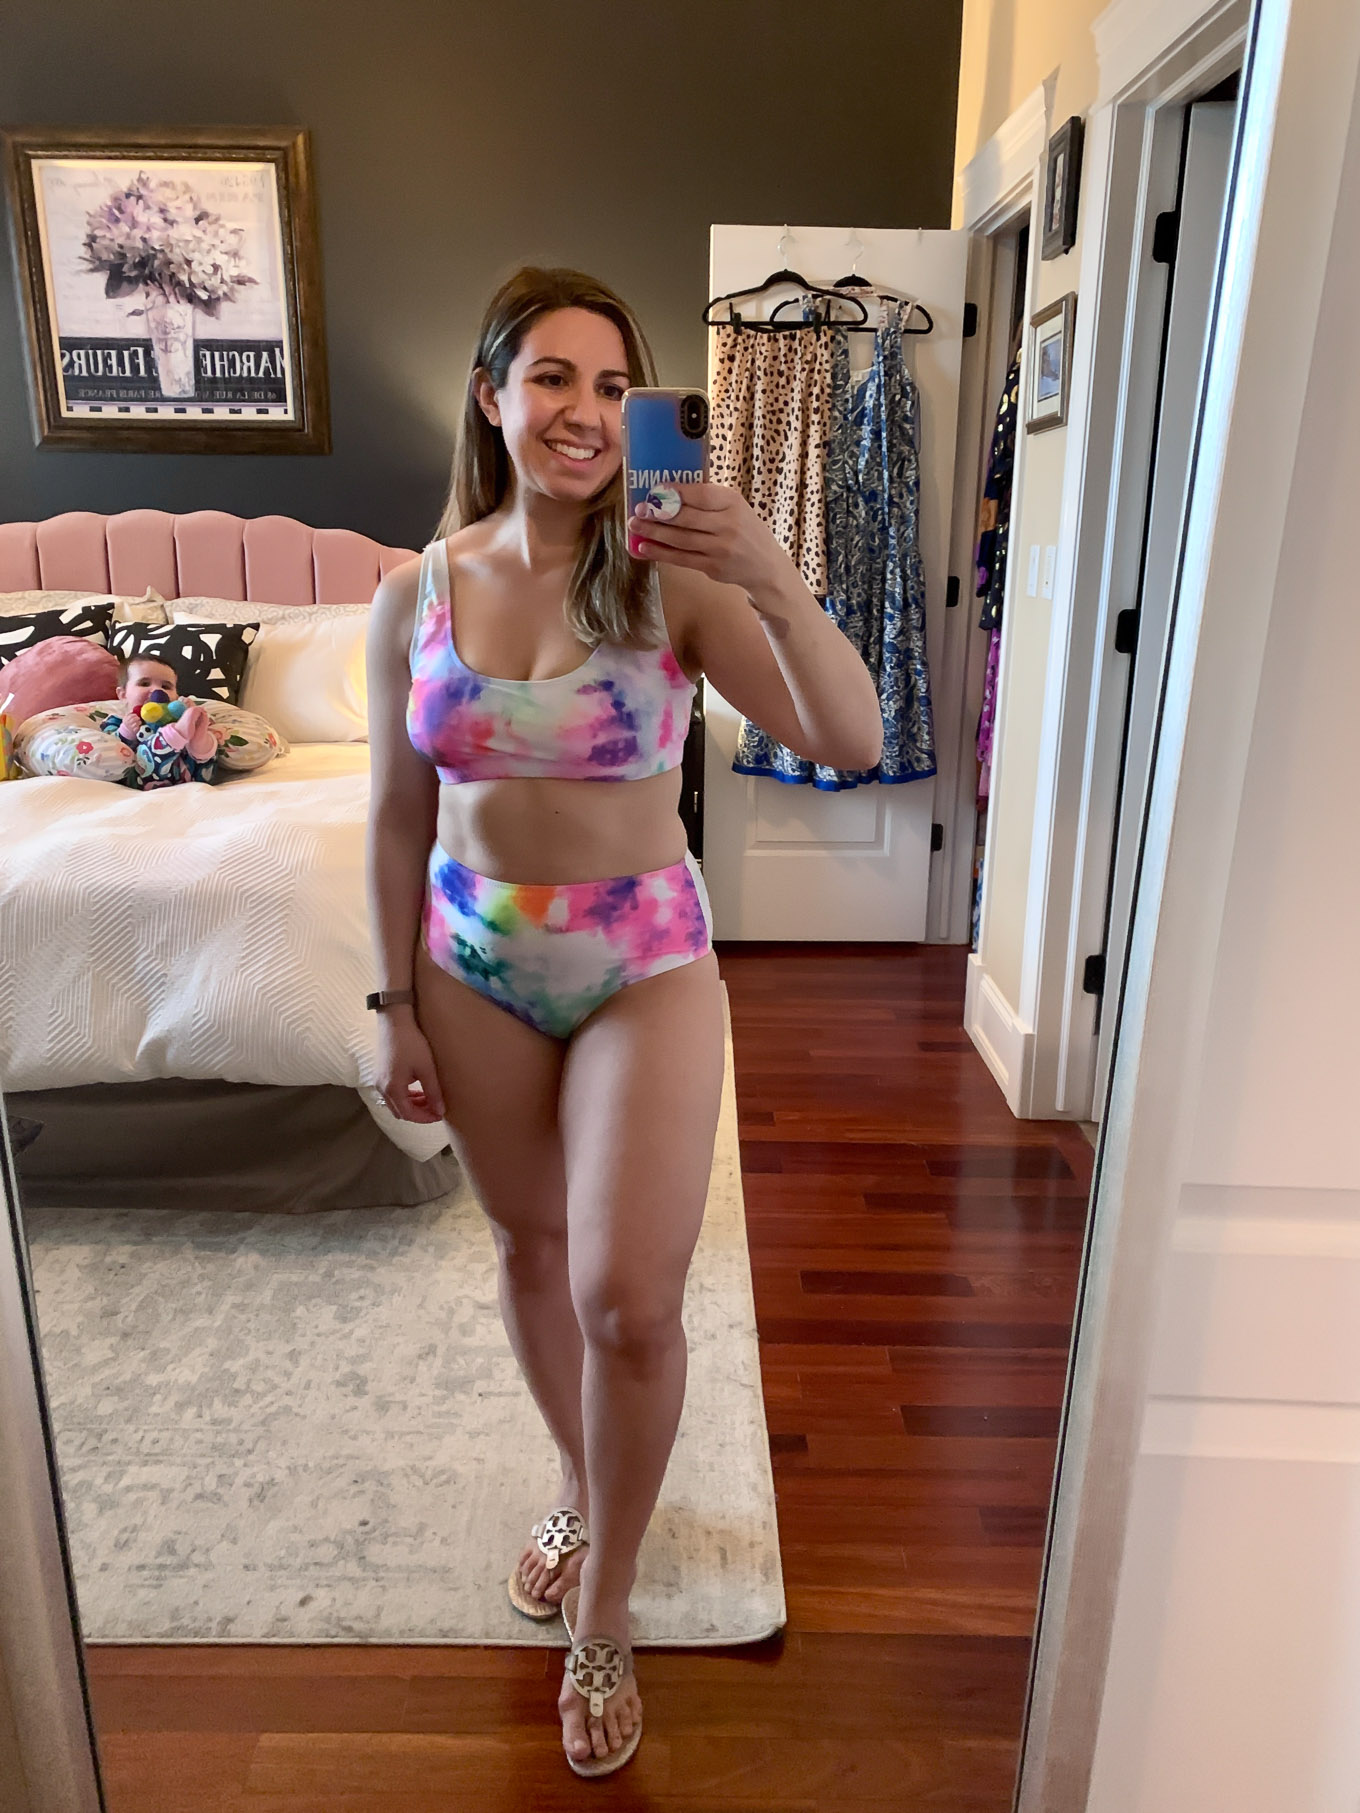 At Home Swimwear Try On by popular Chicago fashion blog, Glass of Glam: image of a woman standing in her master bedroom and wearing a SheIn Tie Dye High Waisted Bikini Swimsuit.